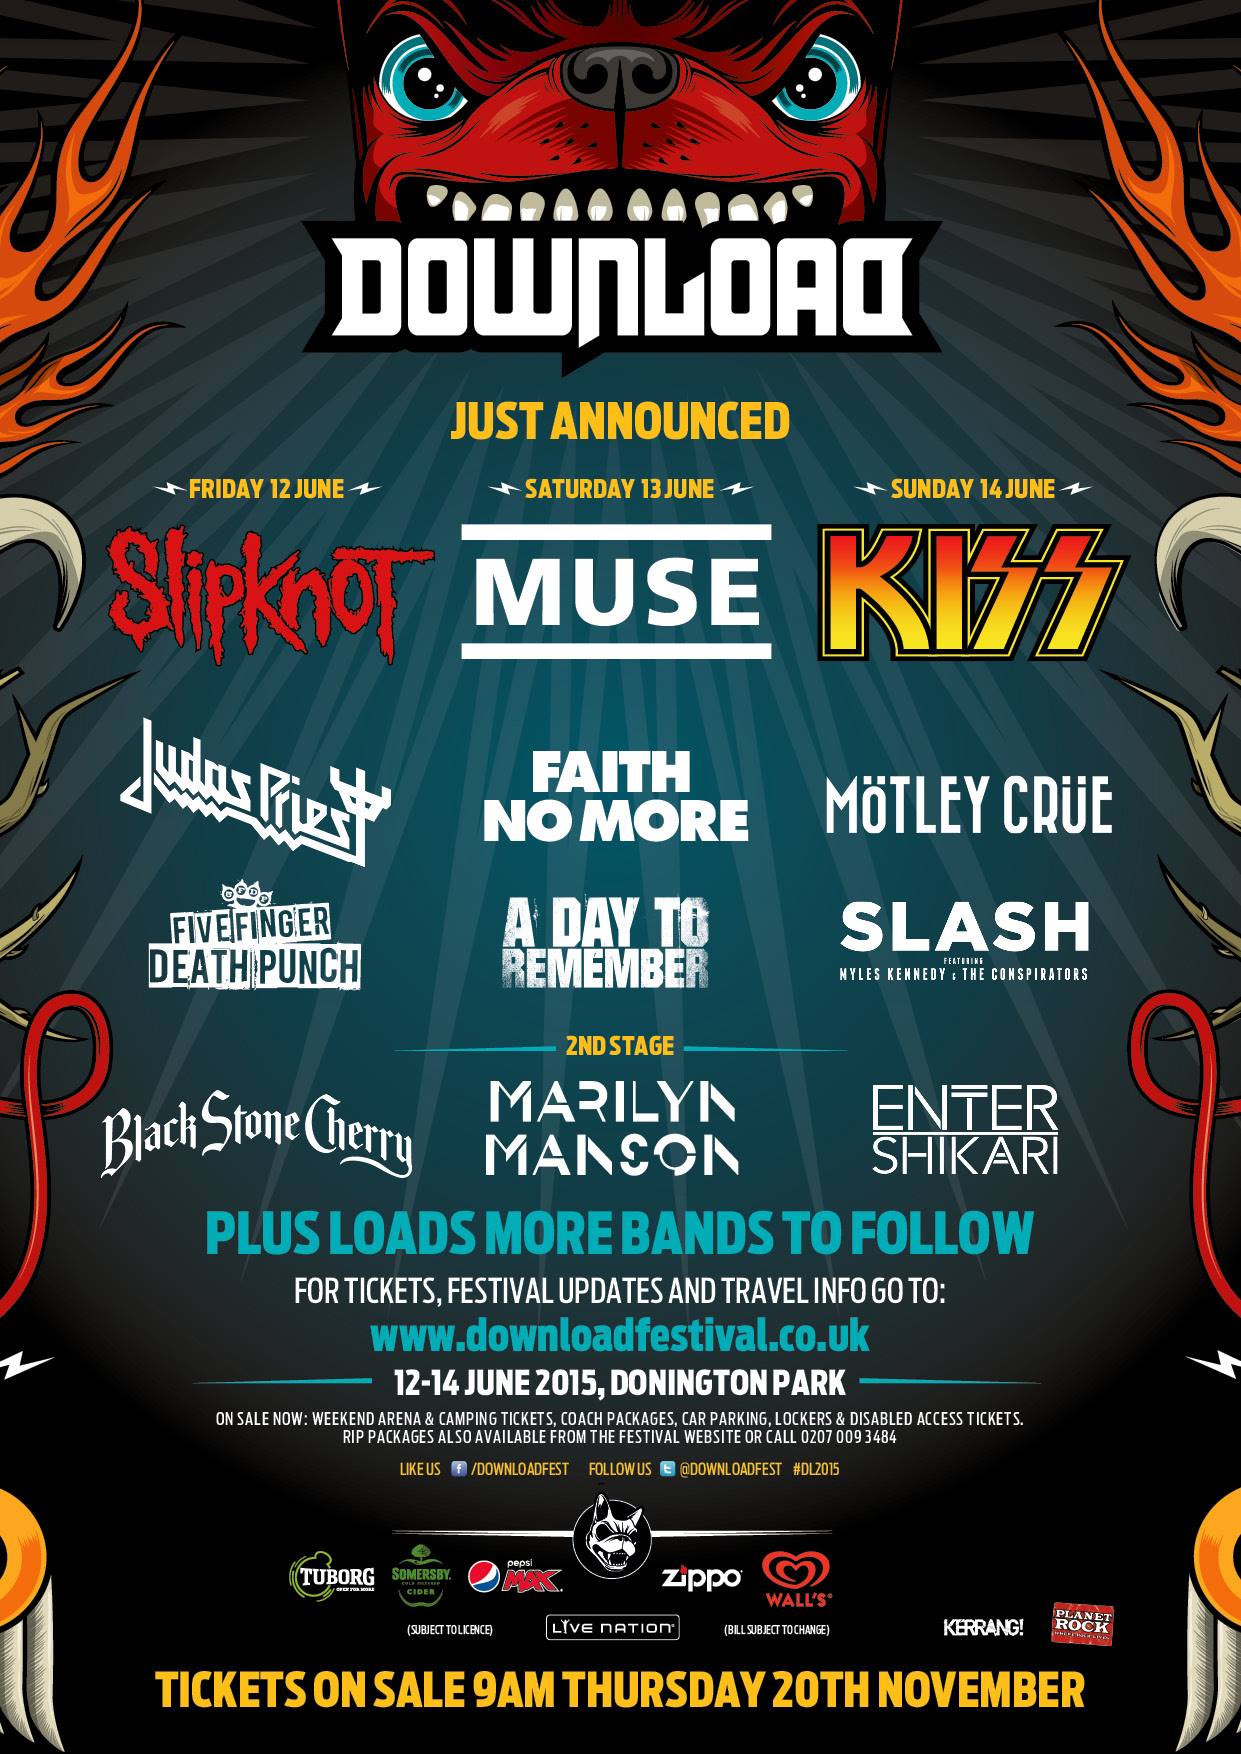 DOWNLOAD FESTIVAL 2015 LINEUP ANNOUNCED SLIPKNOT, MUSE, and KISS SET